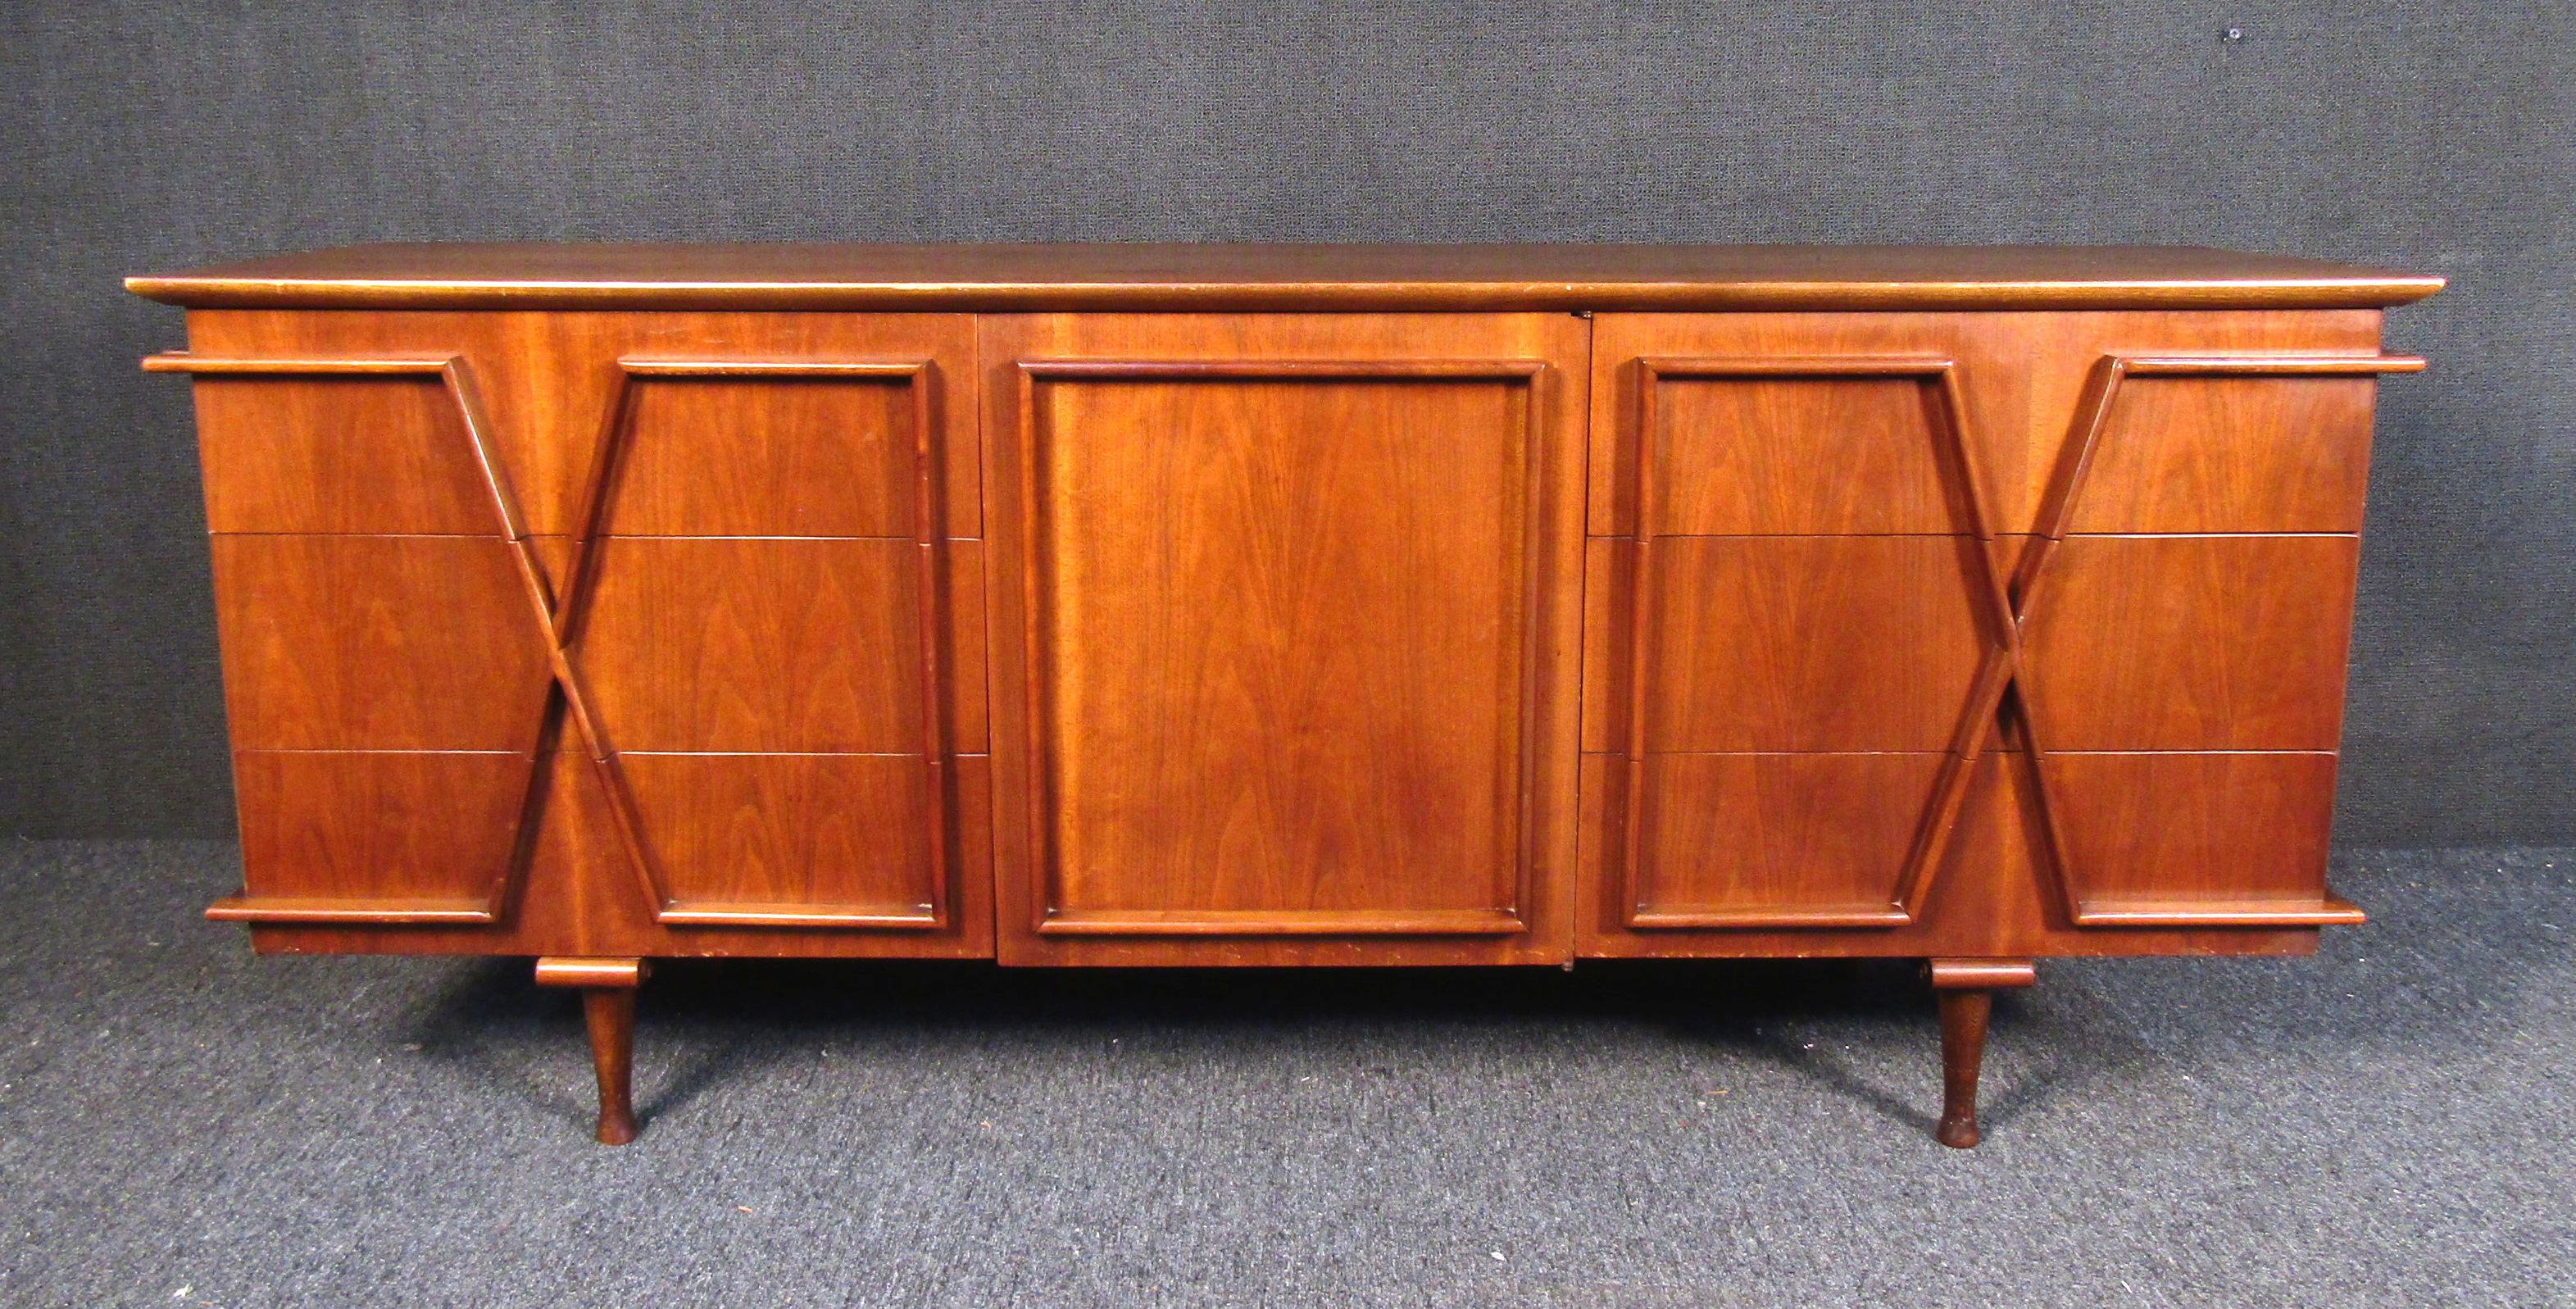 Vintage modern credenza featuring a sculpted design front in rich walnut wood grain.
This dresser has six larger drawers with three smaller center drawers.

(Please confirm item location - NY or NJ - with dealer).